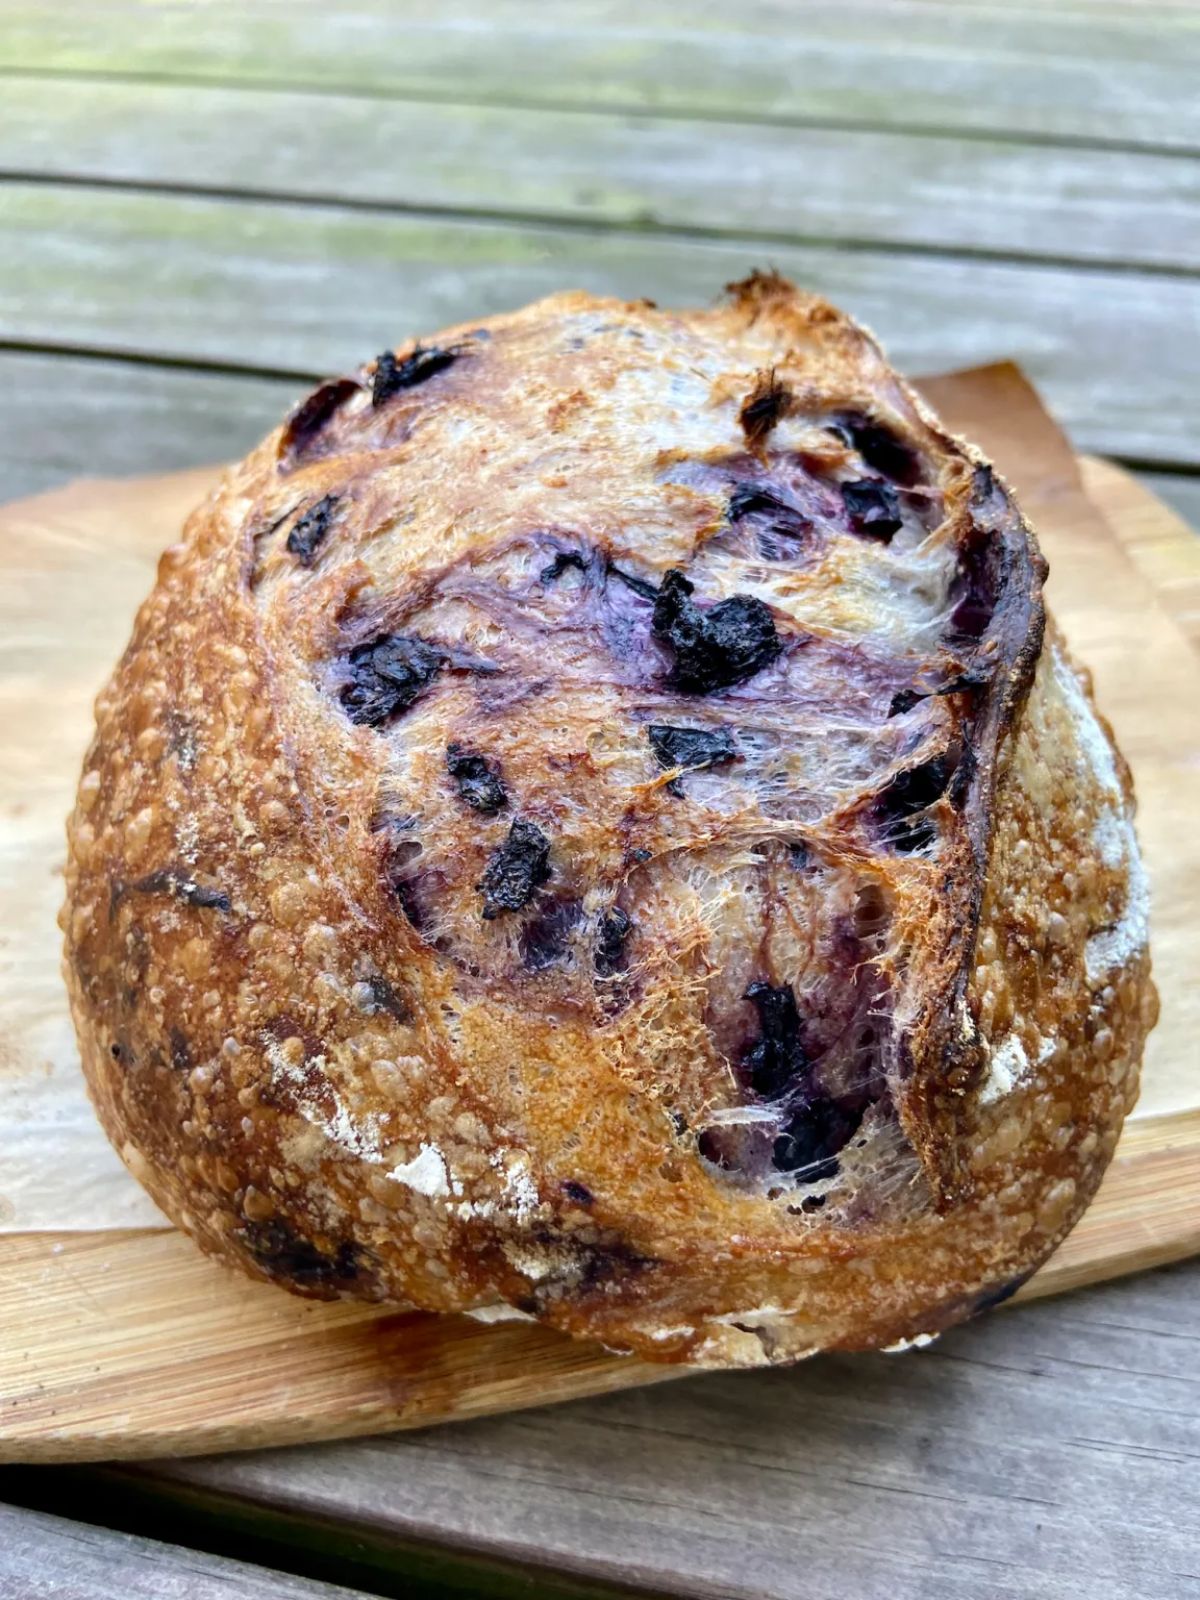 A loaf of blueberry sourdough bread on a wooden cutting board.